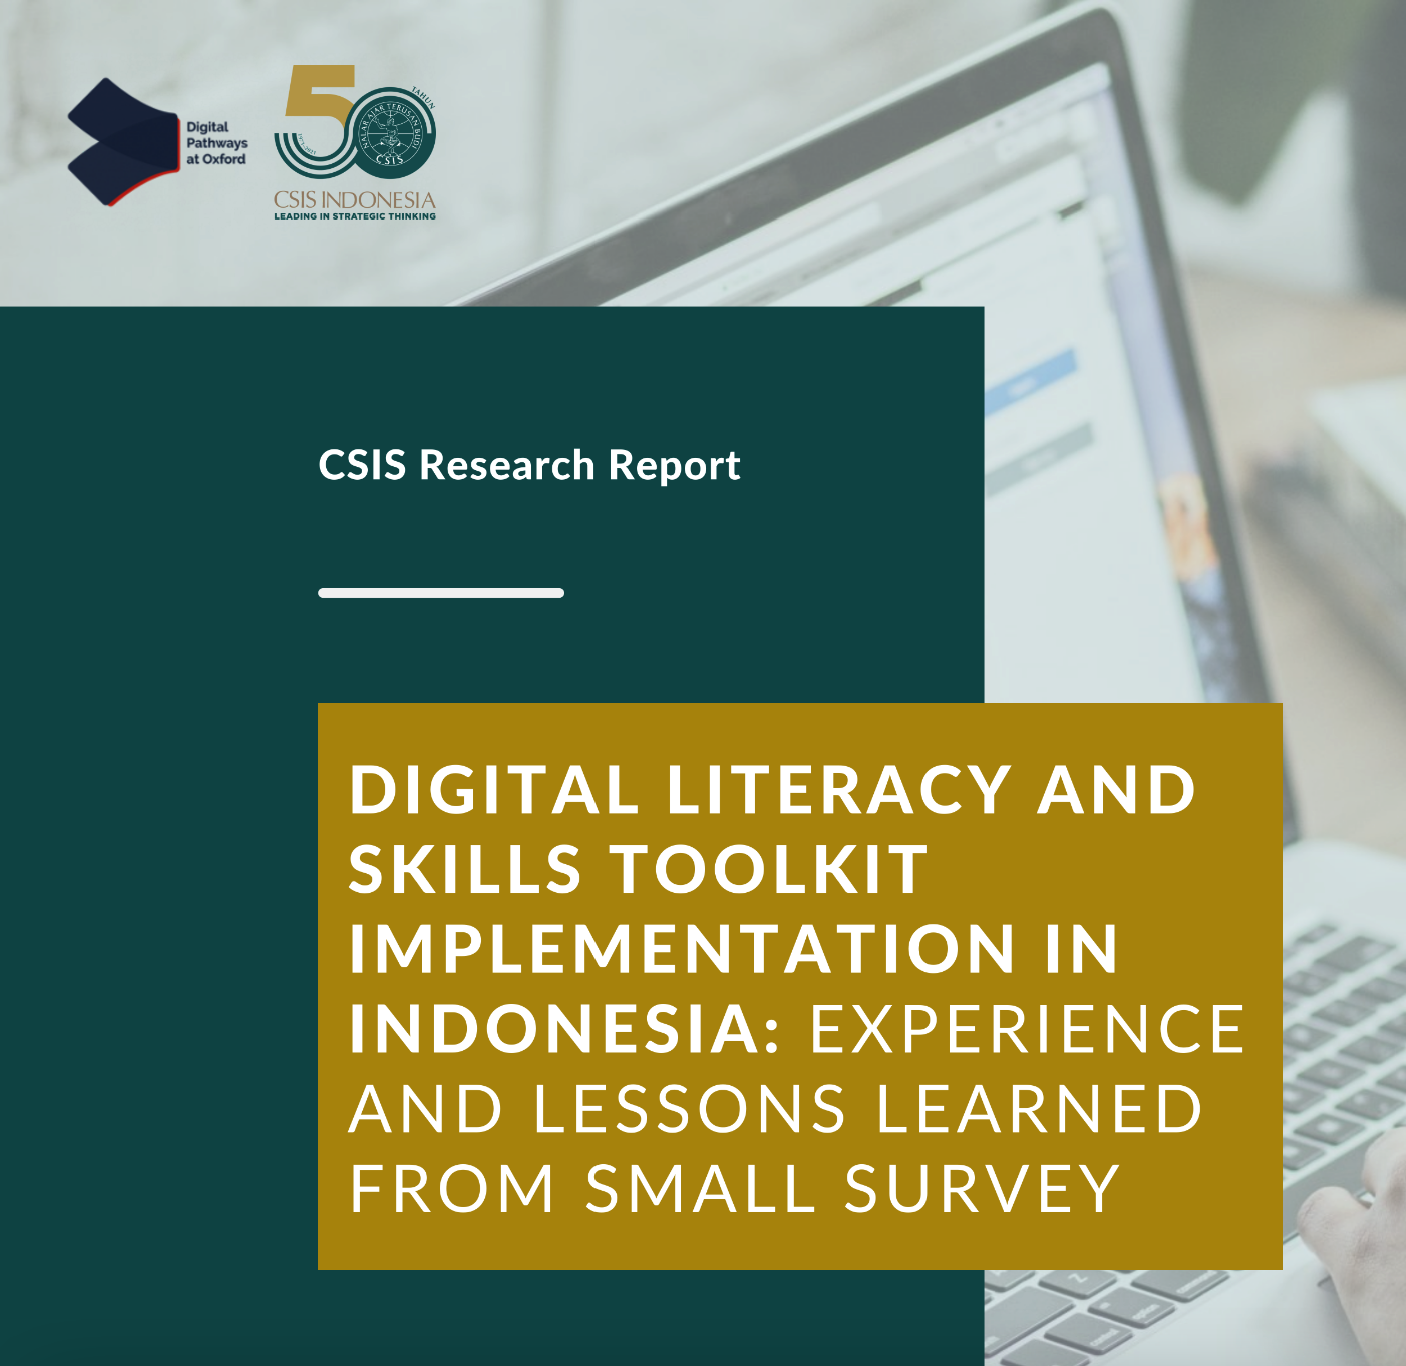 Digital literacy and skills toolkit implementation in Indonesia